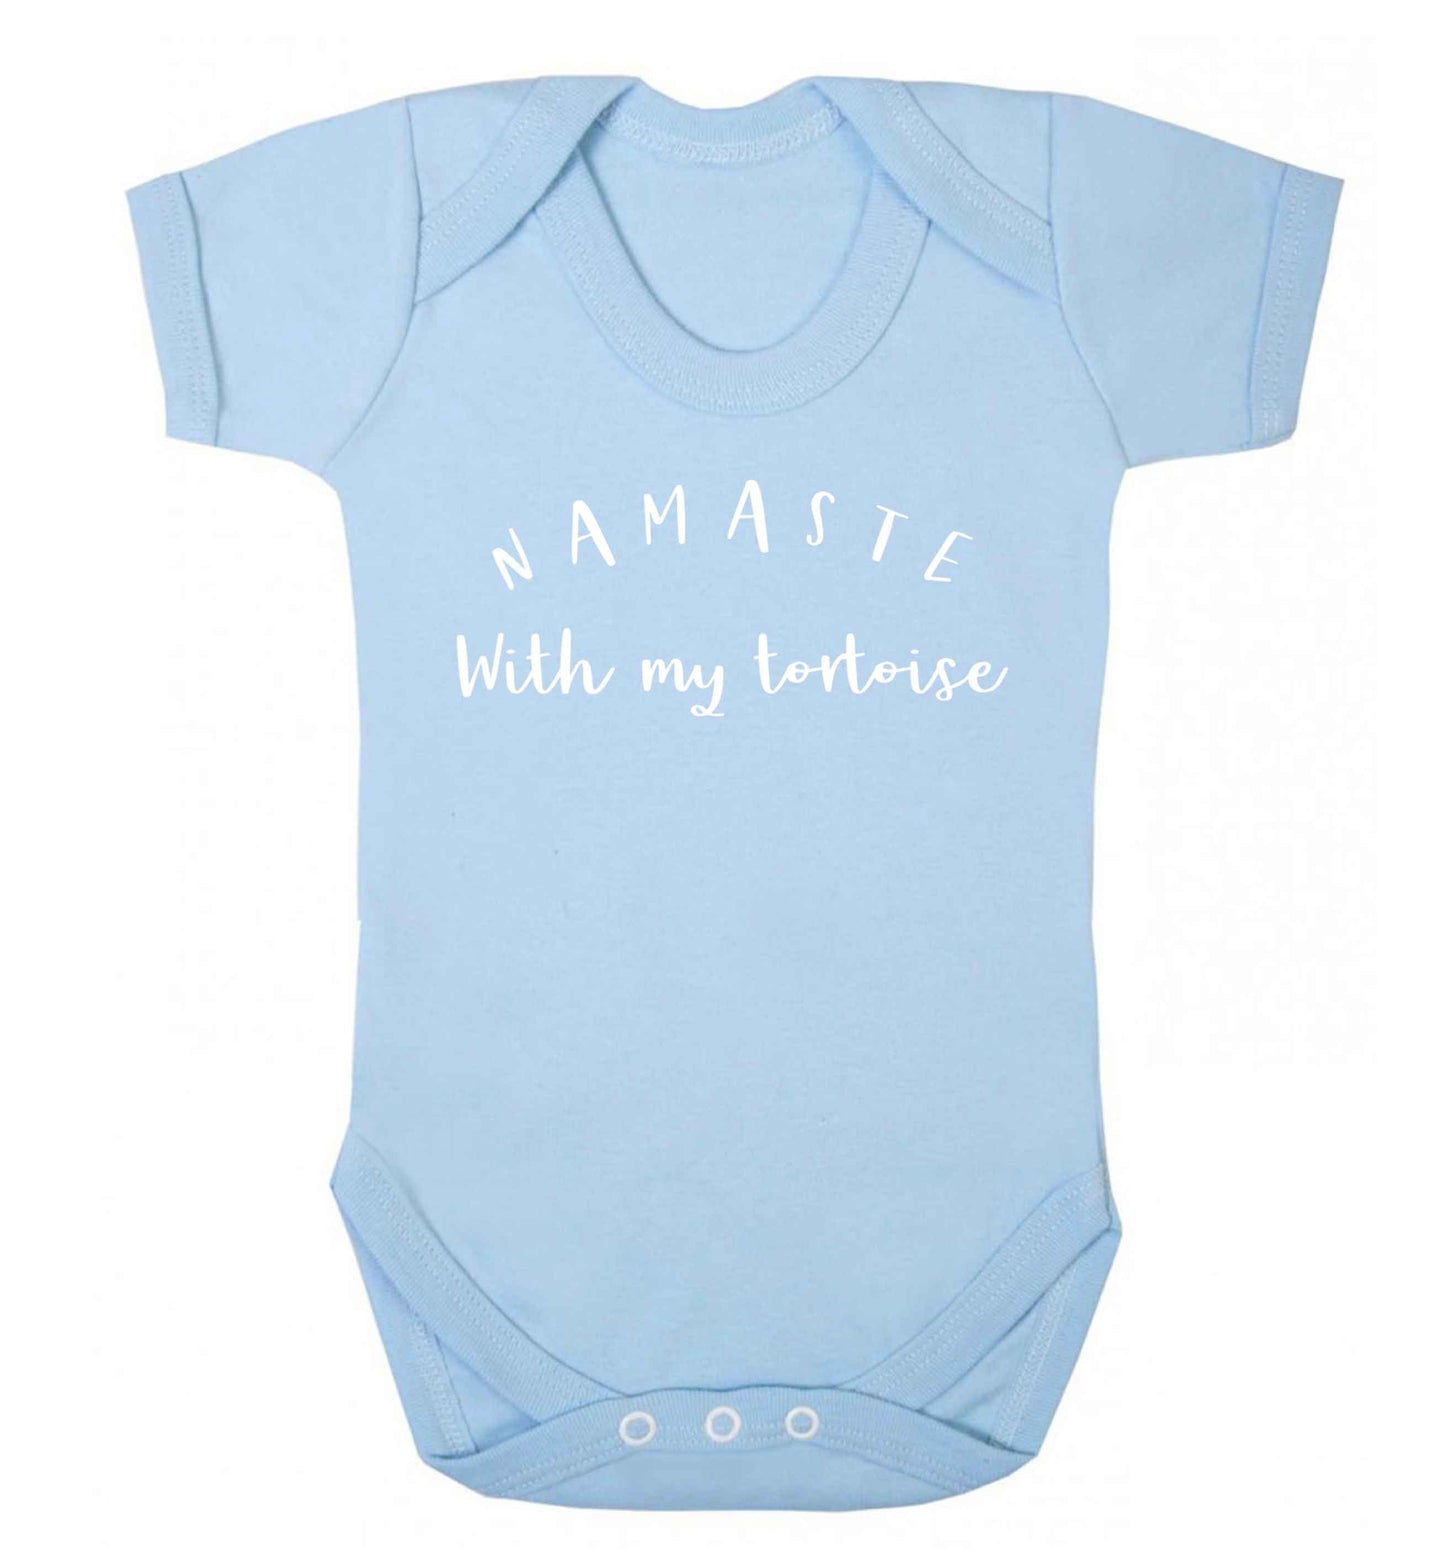 Namaste with my tortoise Baby Vest pale blue 18-24 months